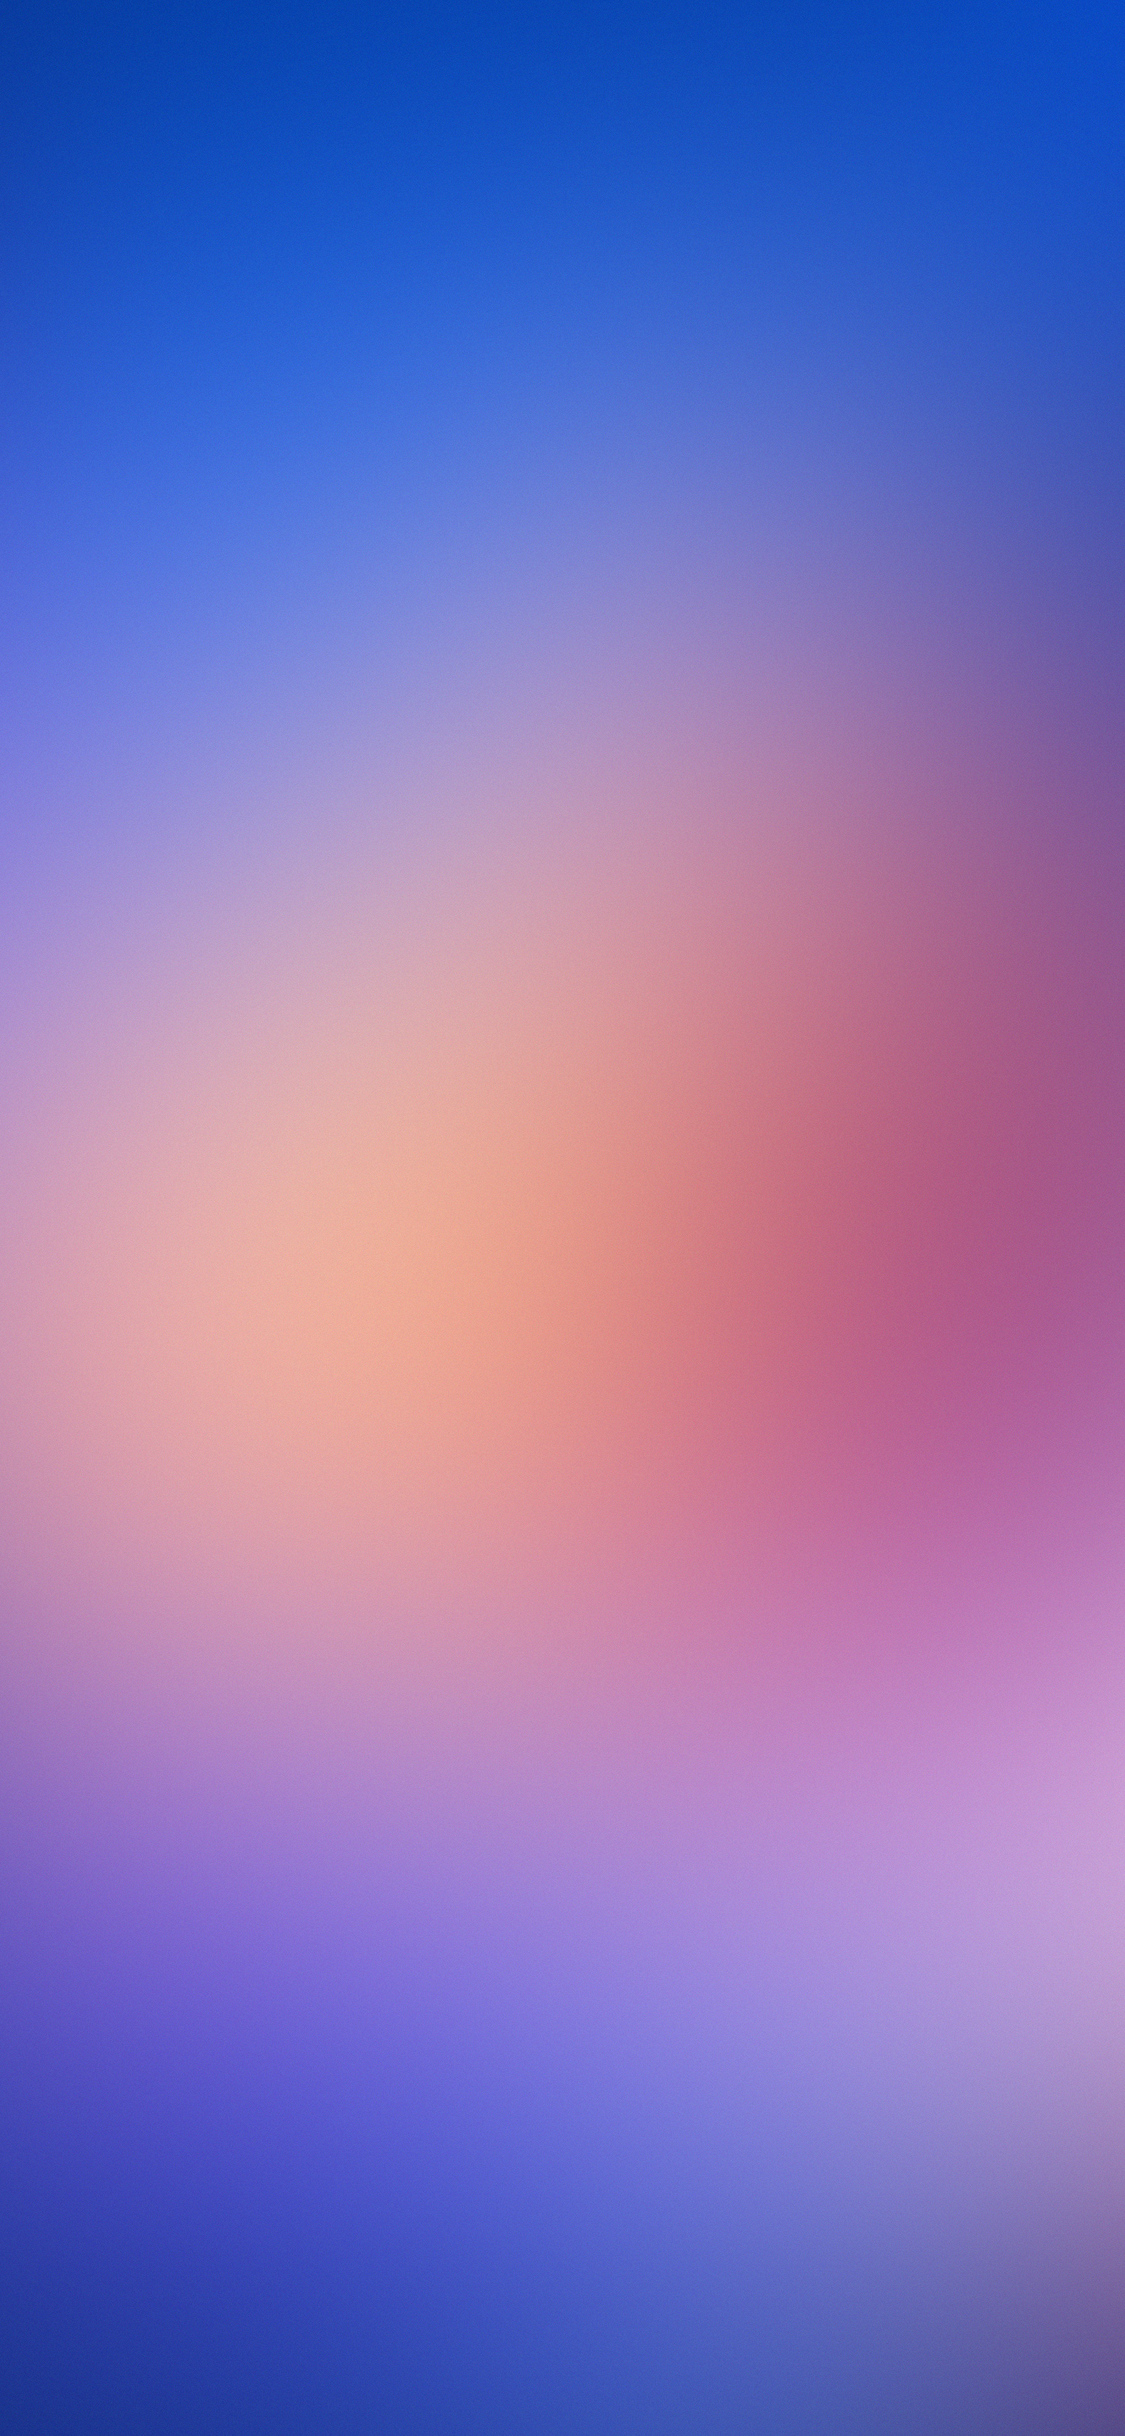 Abstract Blur 4k 5k iPhone XS, iPhone iPhone X